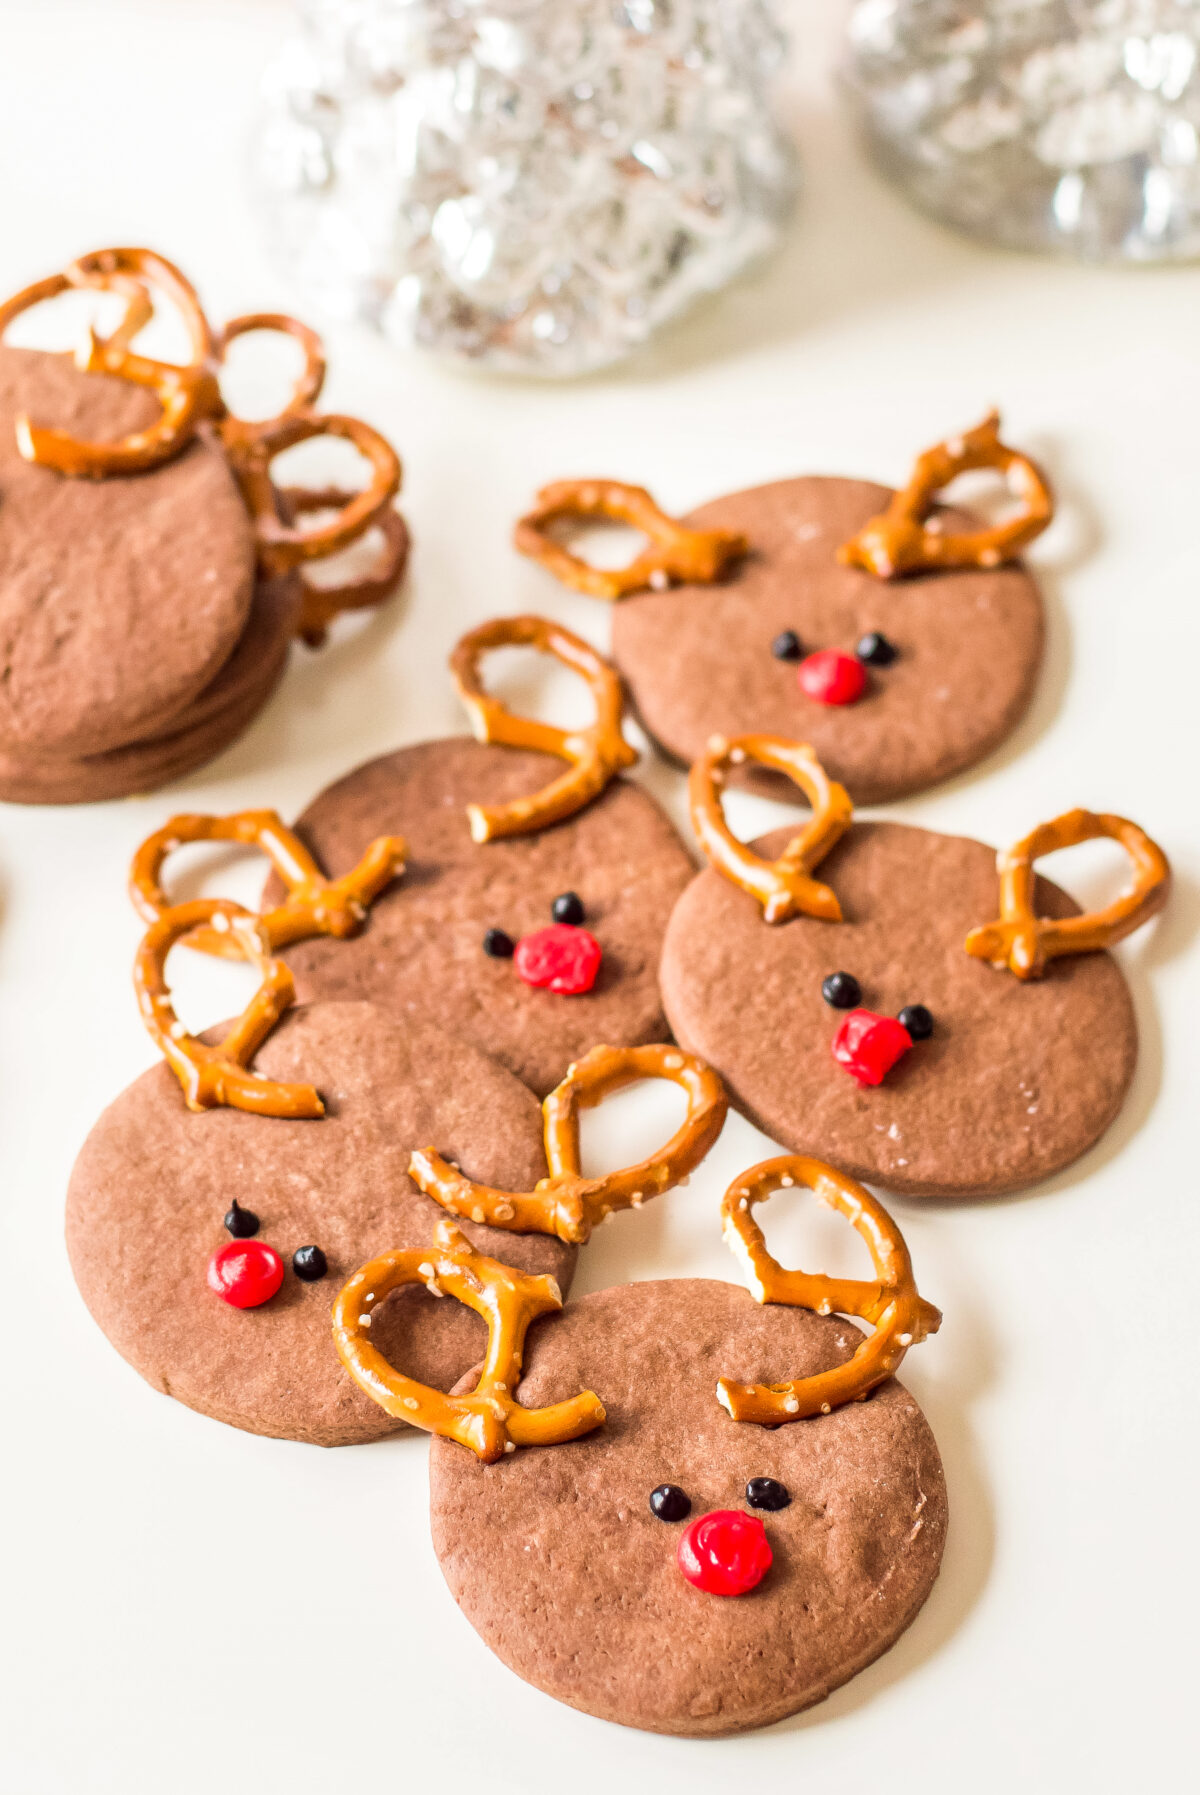 Find out how to make these delicious and festive Rudolph chocolate sugar cookies this Christmas with this easy sugar cookie recipe.